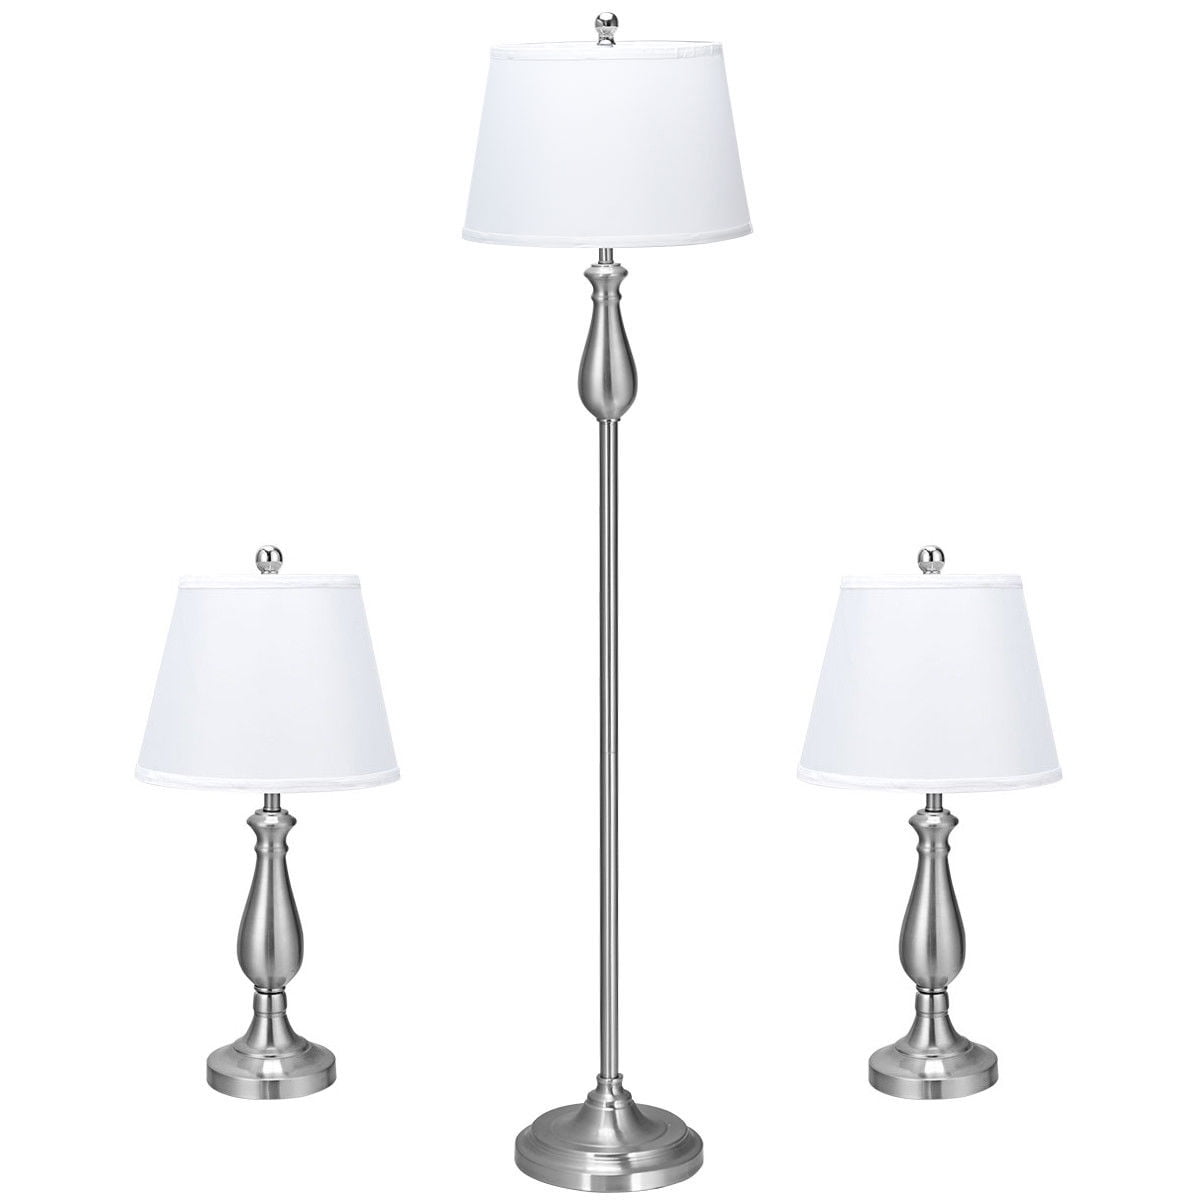 Gymax 3 Piece Lamp Set 2 Table Lamps 1, Floor And Table Lamp Sets Canada